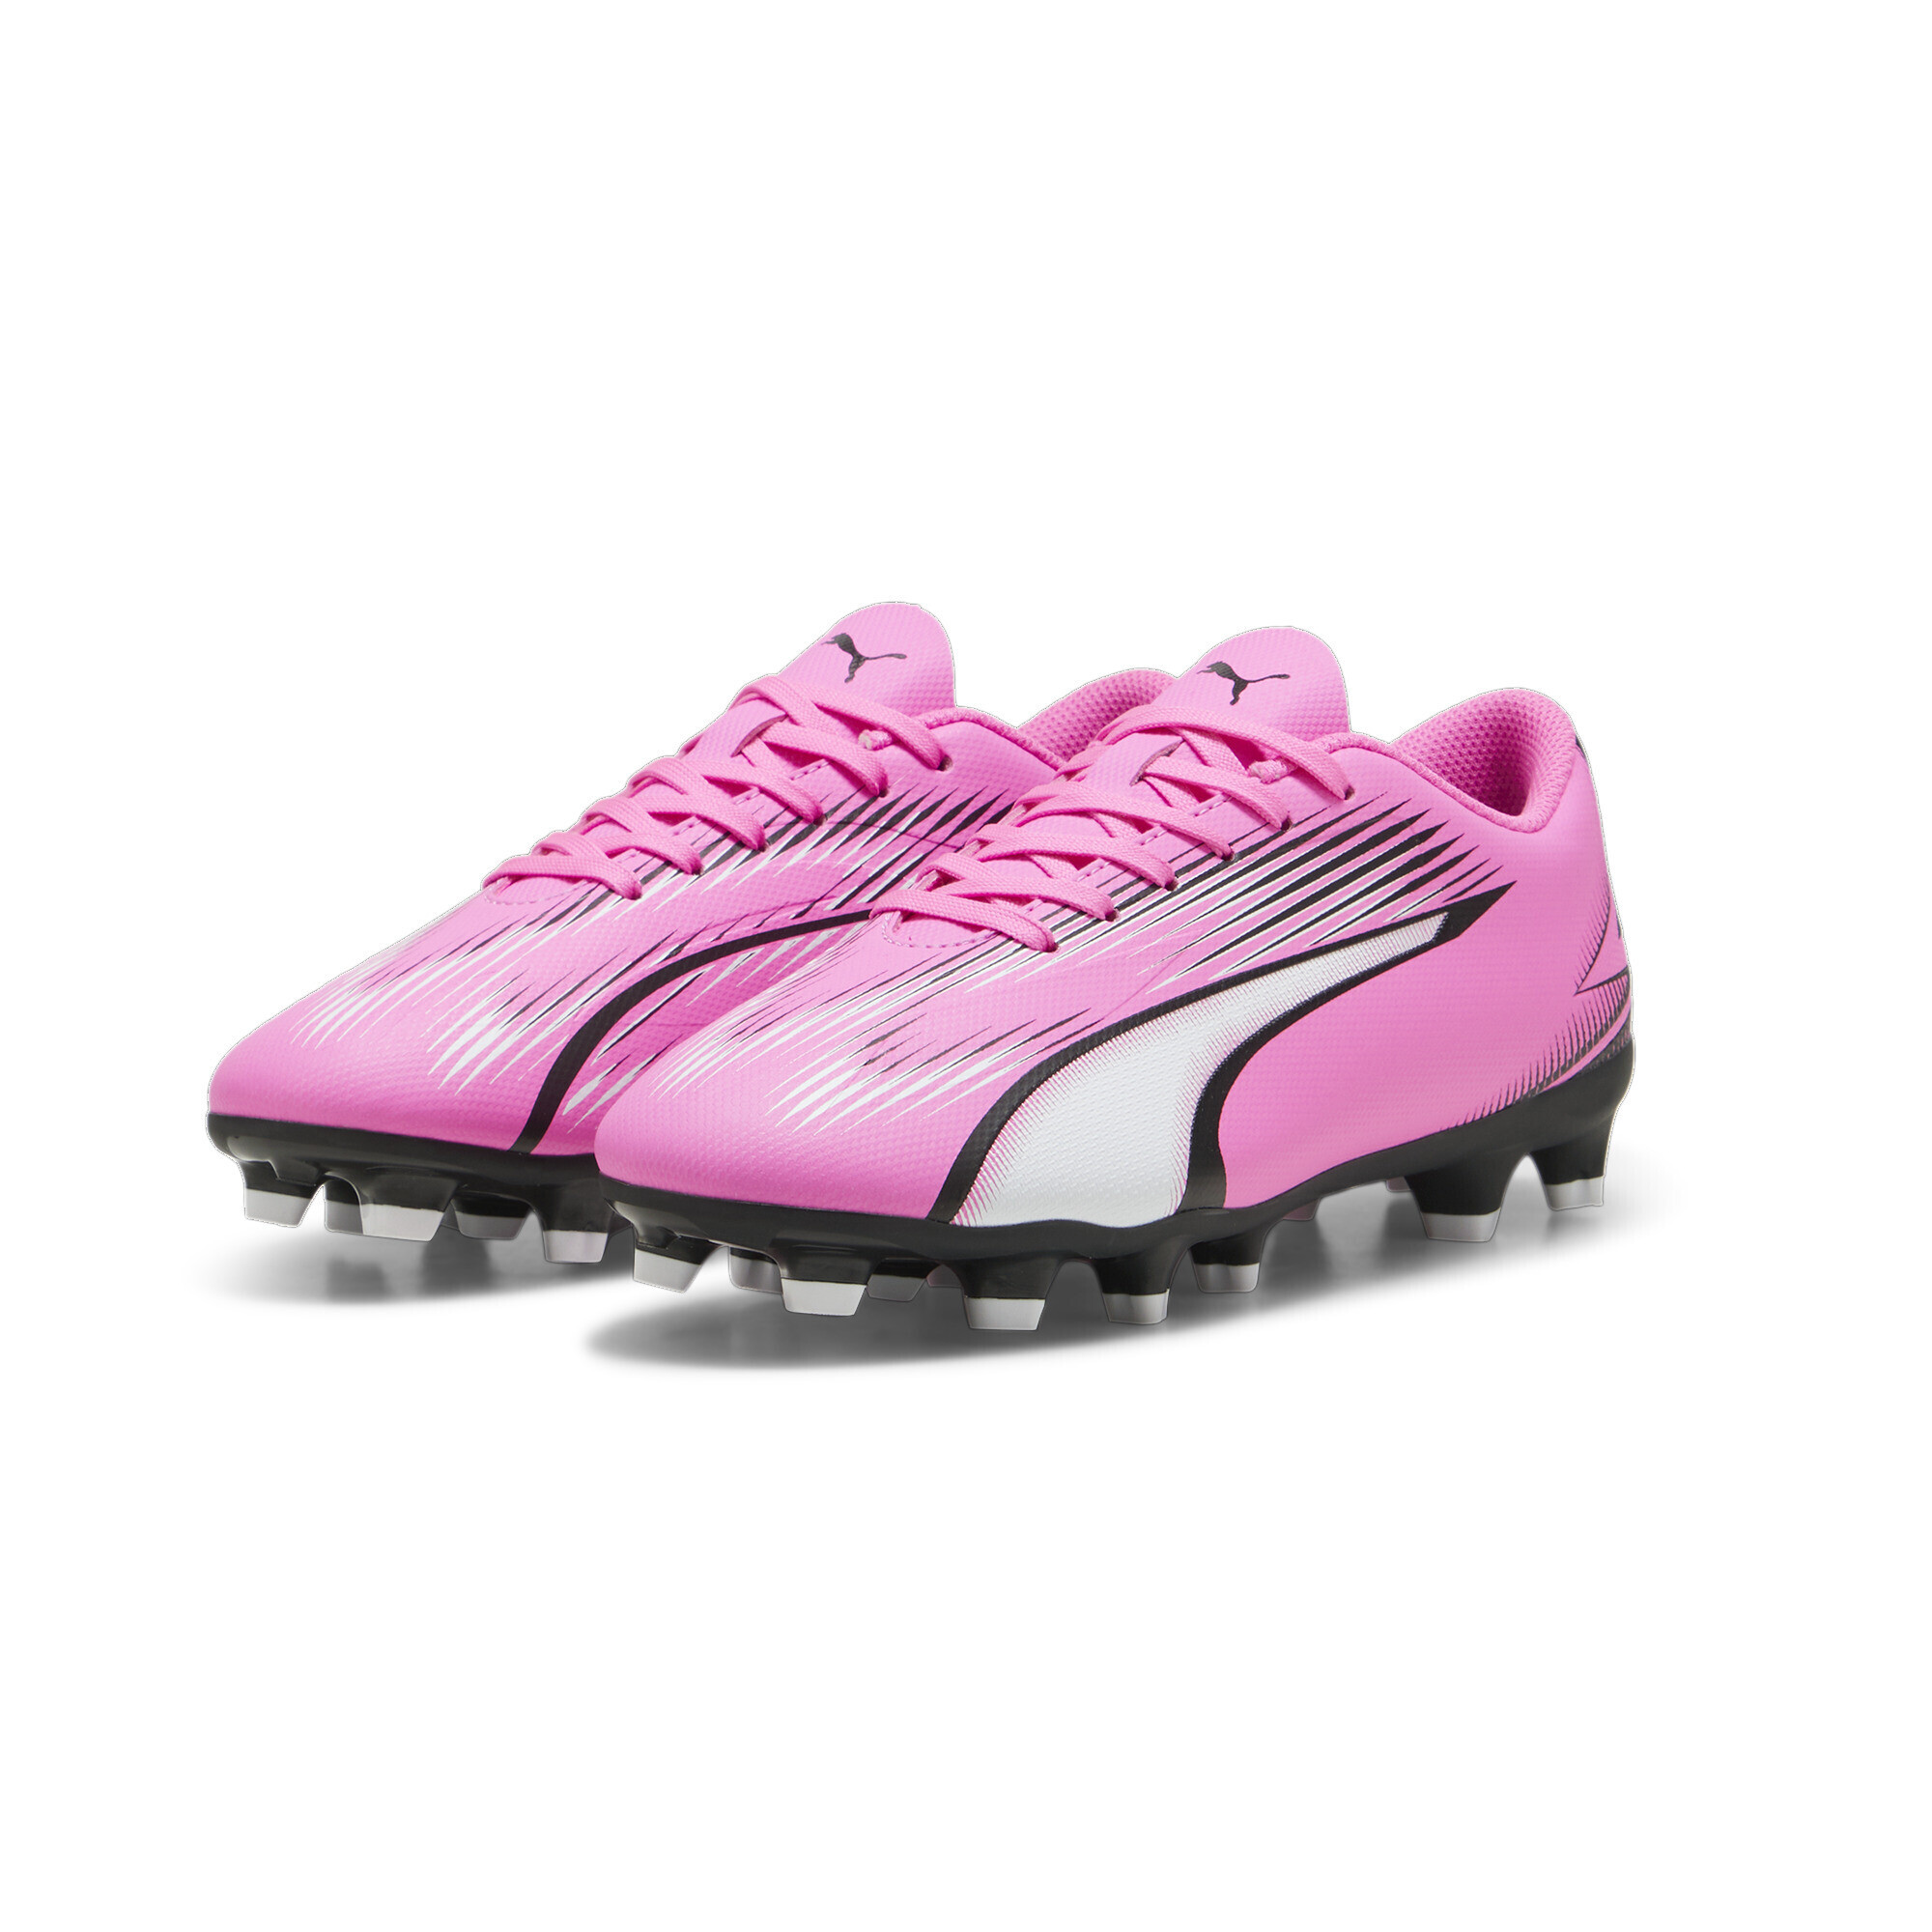 PUMA ULTRA PLAY FG/AG Youth Football Boots In Pink, Size EU 30